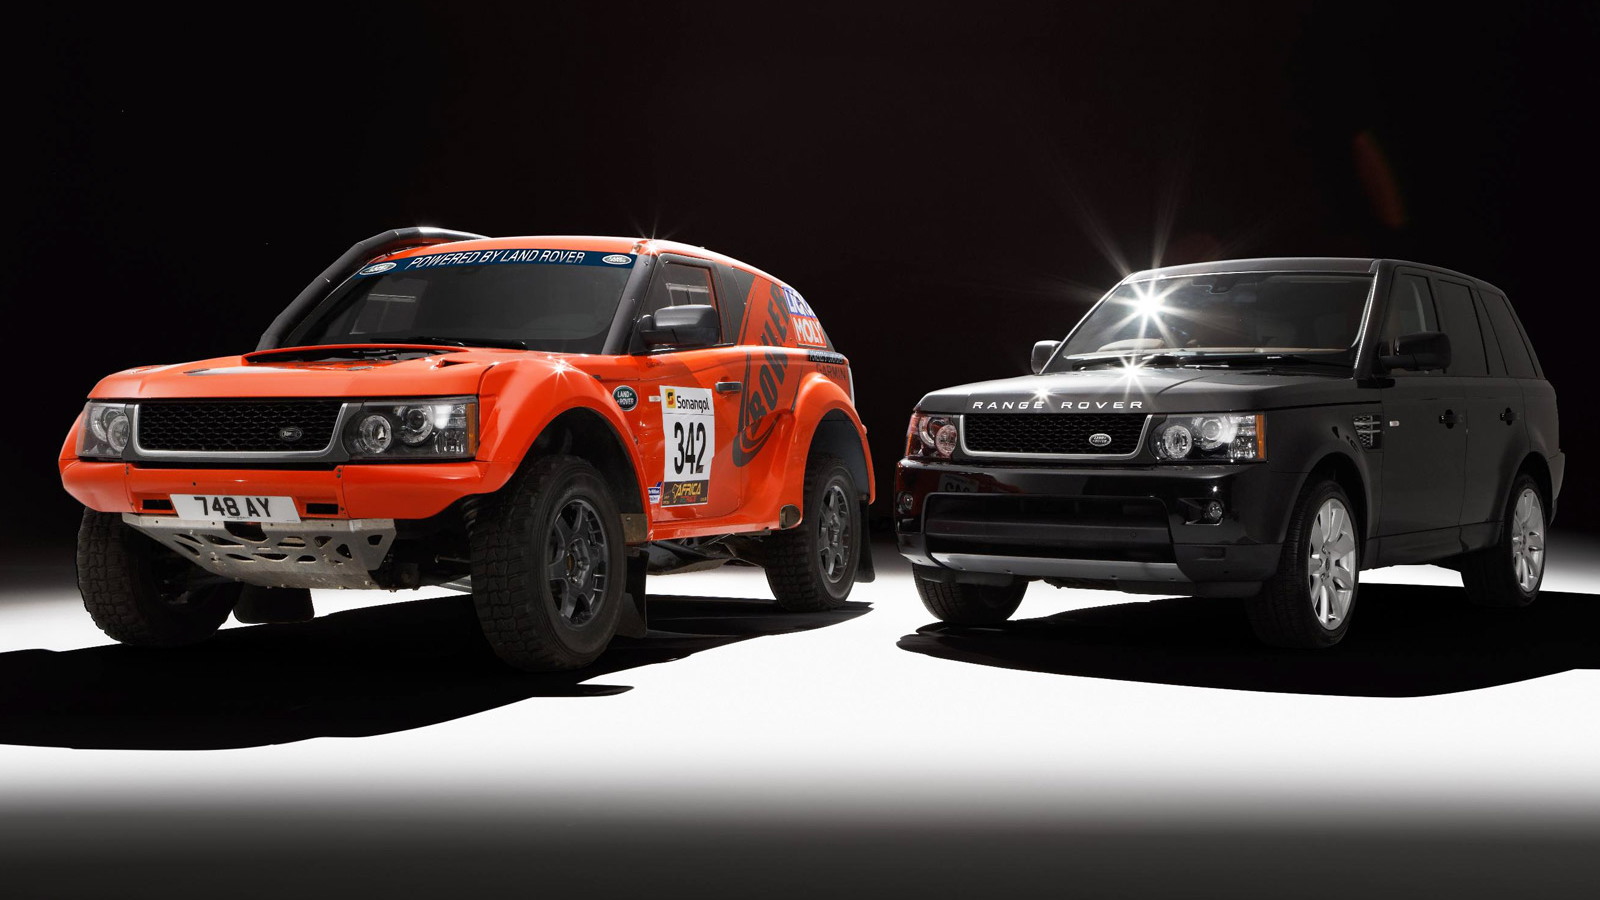 Bowler EXR rally raid SUV and the Range Rover Sport on which it's based